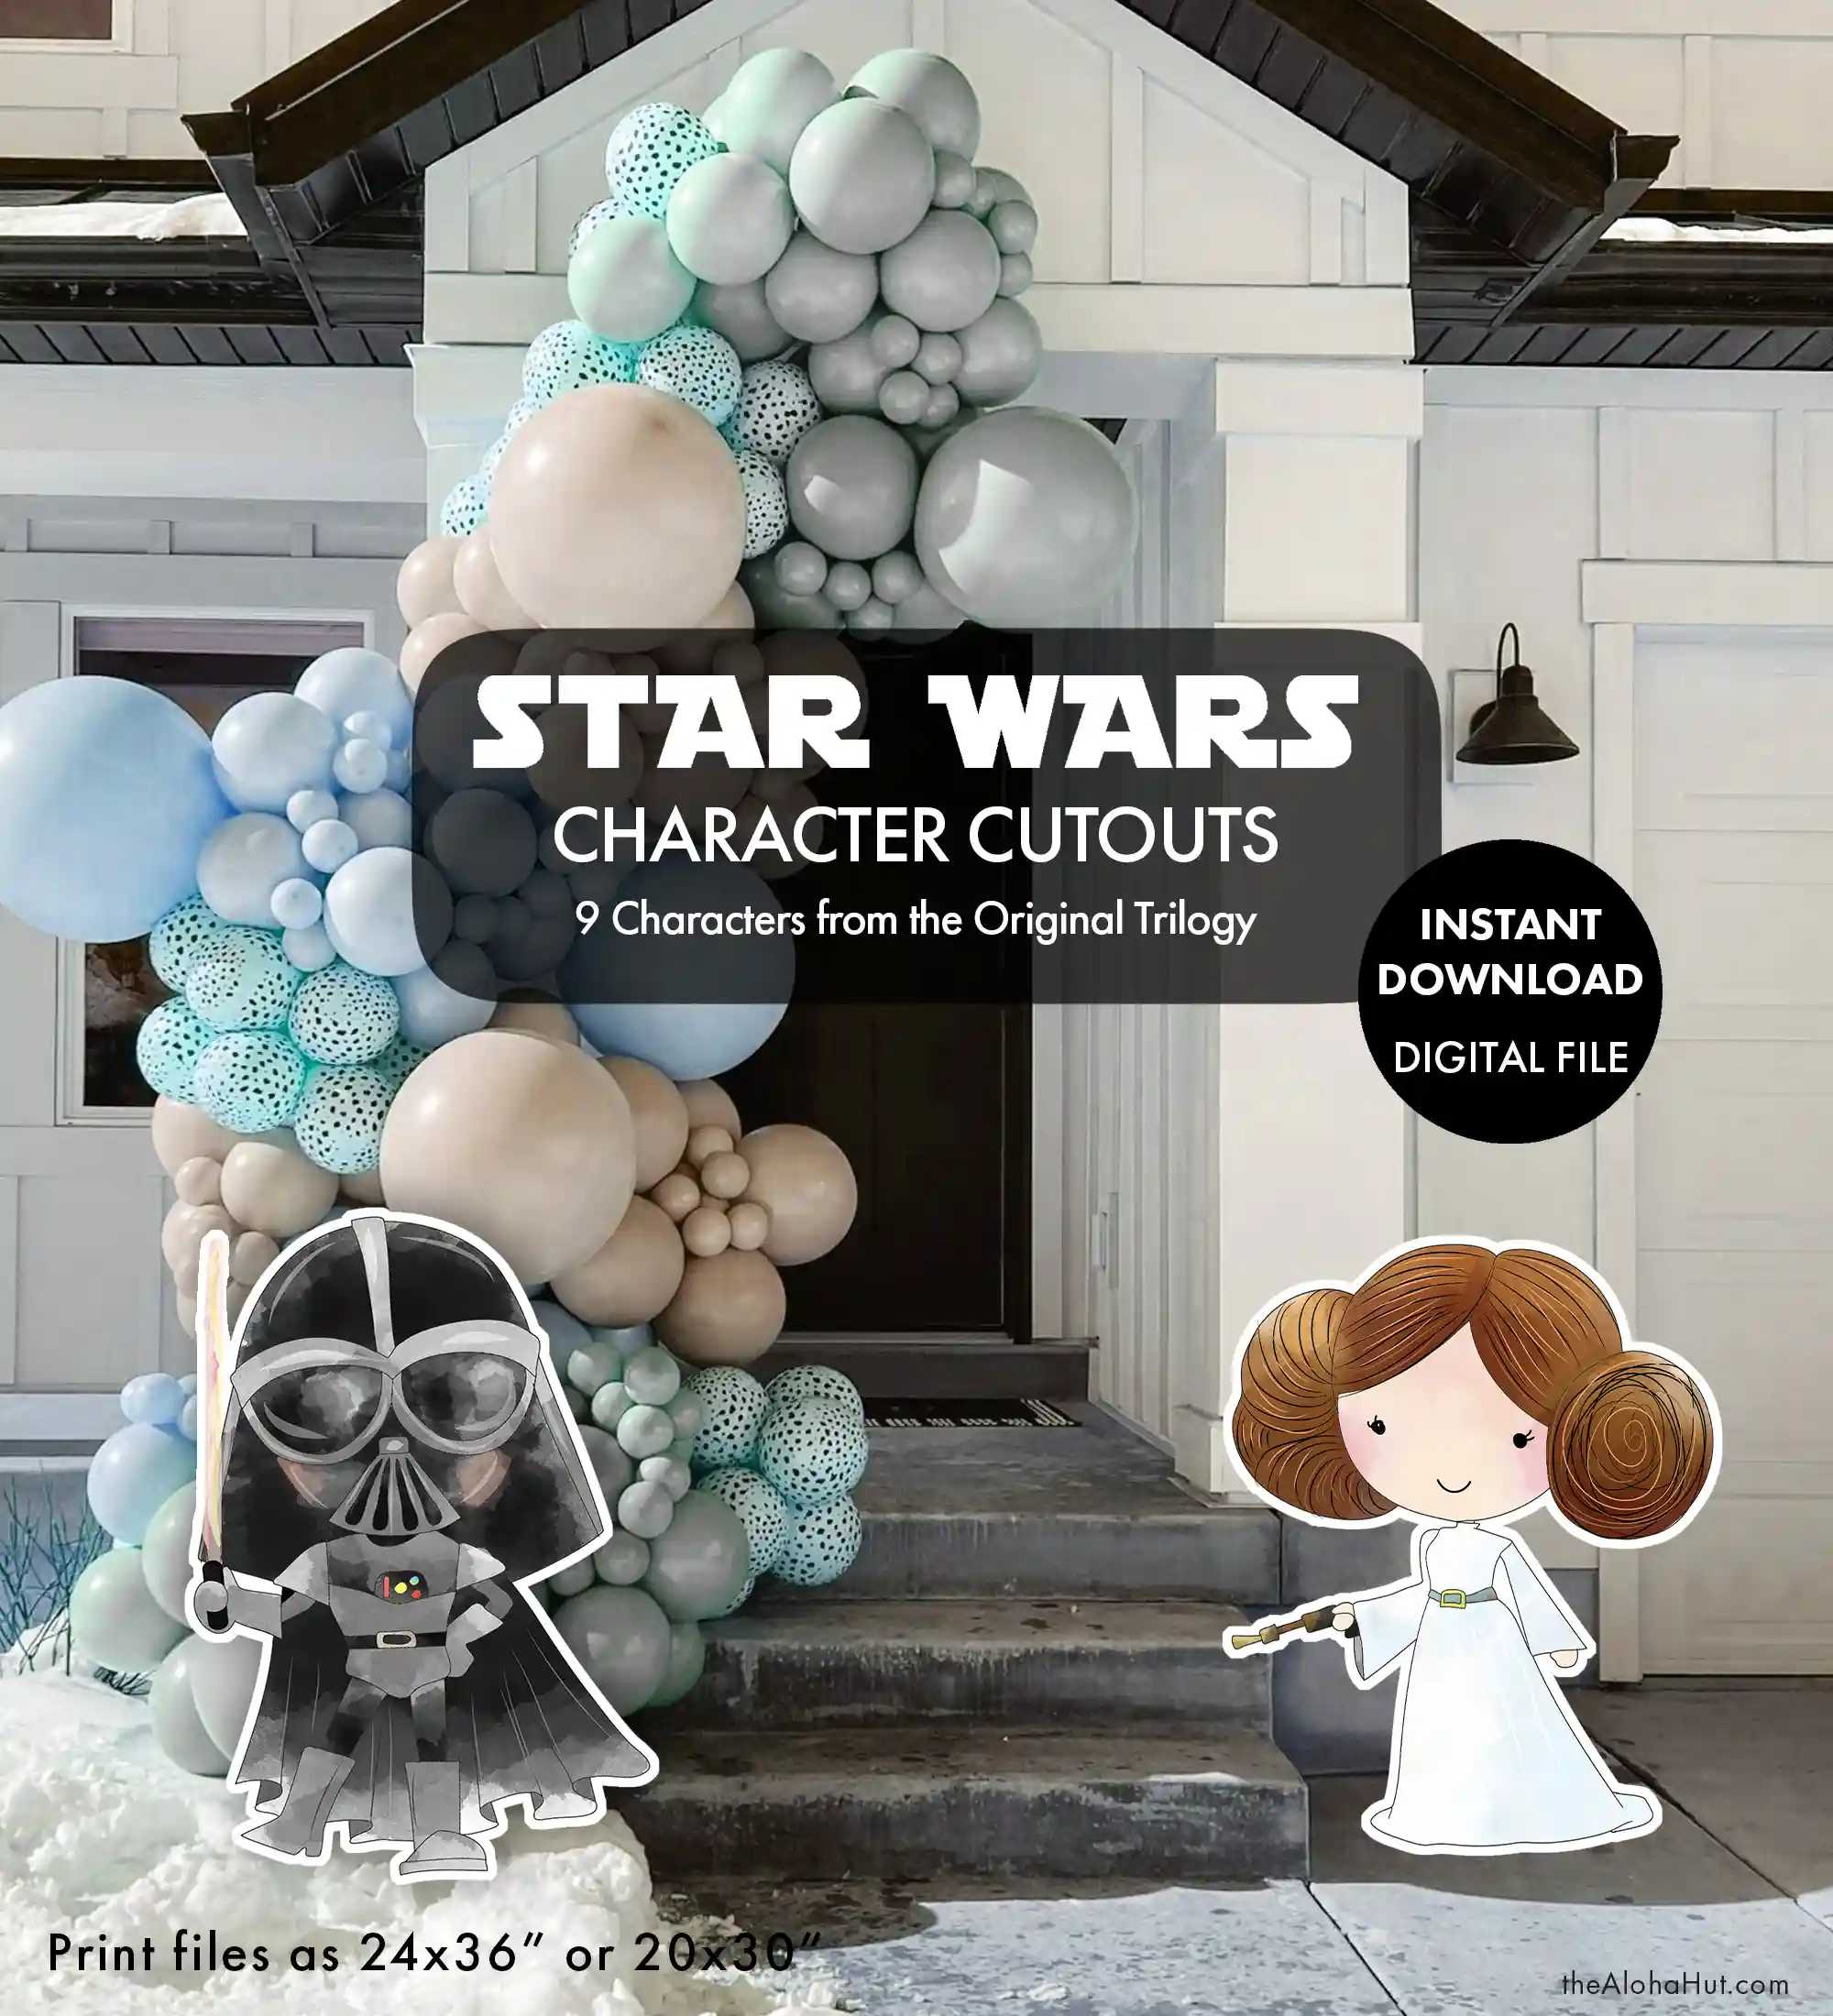 Star Wars party ideas, activities, birthday party games, decorations, and prints. Ideas and tips and tricks for throwing the best Star Wars themed kids birthday party, baby shower, or one with the force celebration. Includes Star Wars printable games, decorations (cupcake toppers, banners, gift tags, characters) and Star Wars party games (BINGO, scavenger hunt, pin the lightsaber on Yoda or Darth Vader). Character cutouts include Princess Leia, Darth Vader, Han Solo, Luke Skywalker, Chewbacca, Yoda, R2-D2, C-3PO, Storm Trooper.